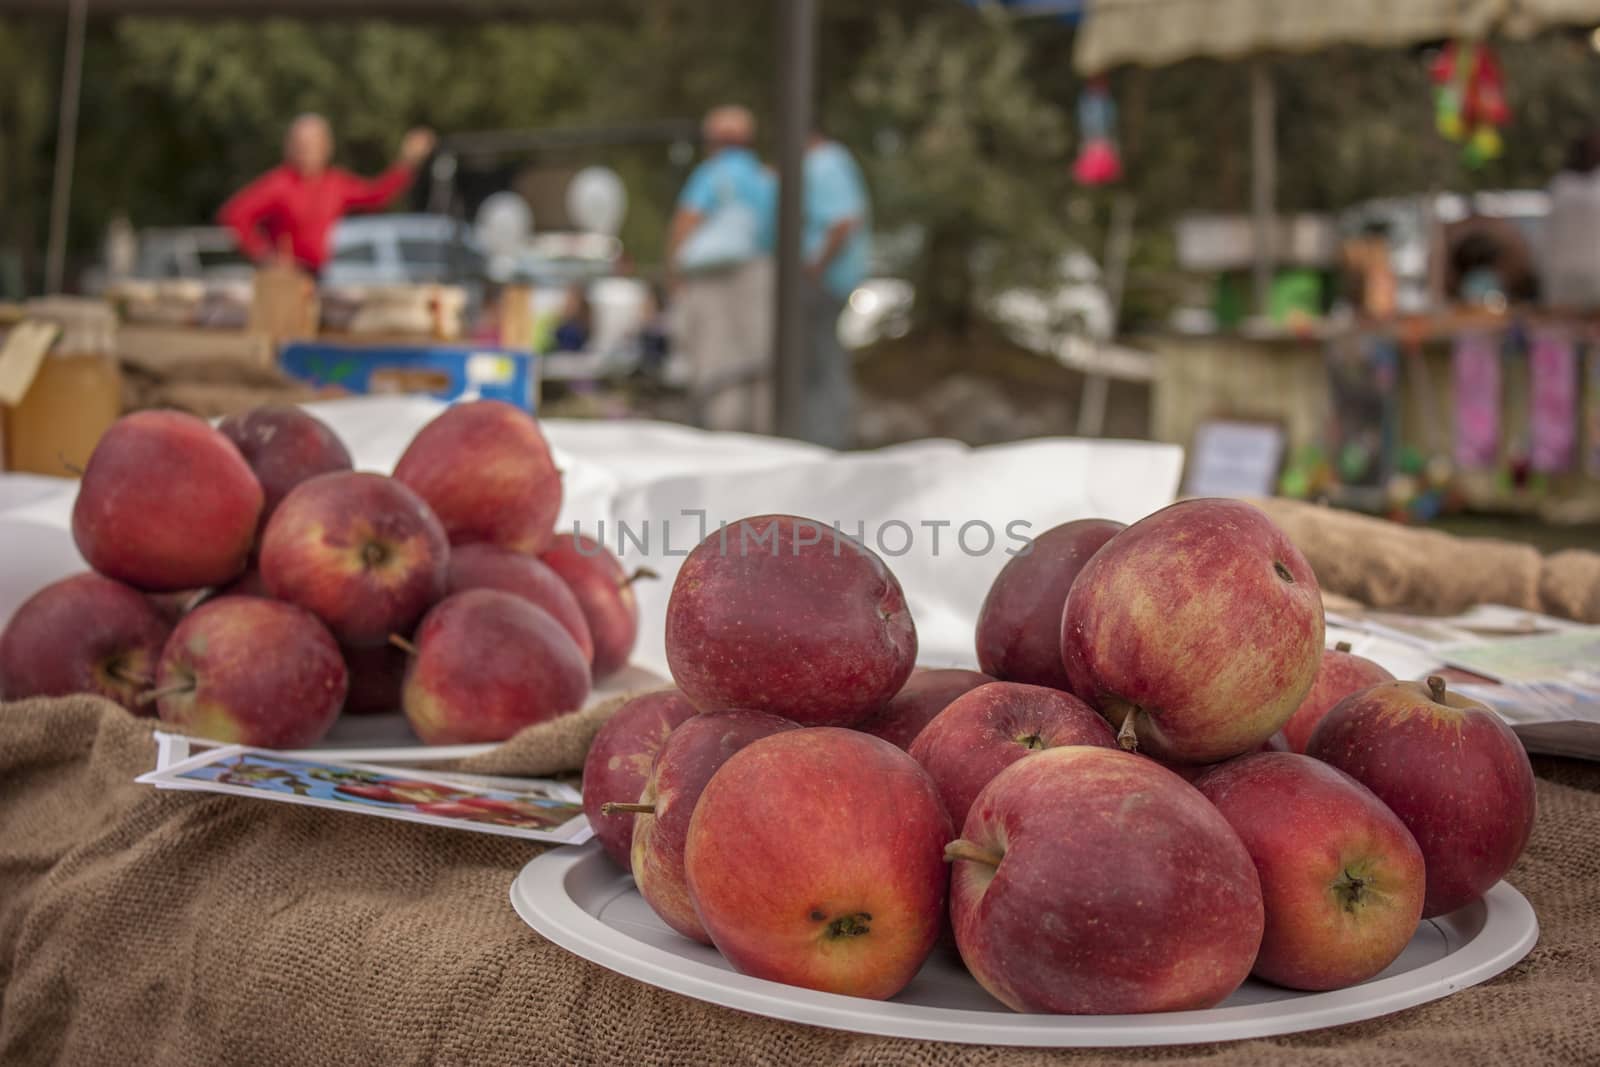 Two plates of red apples on top of a table at a traditional Italian banquet.